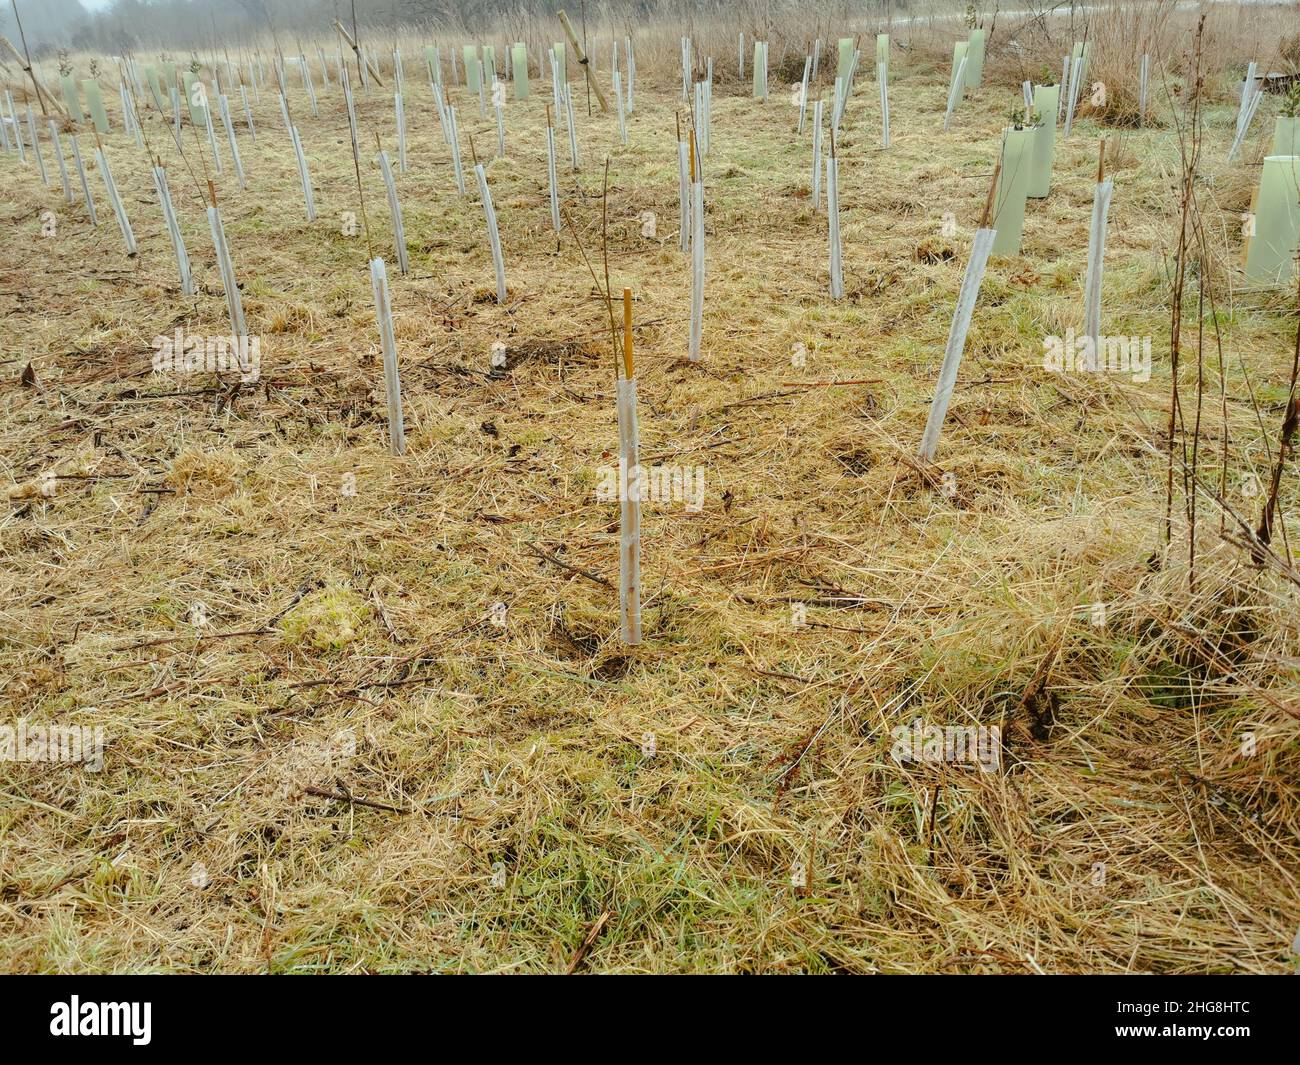 Culture of tree saplings on a field meant for reforestation of areas where the number of trees decreased Stock Photo